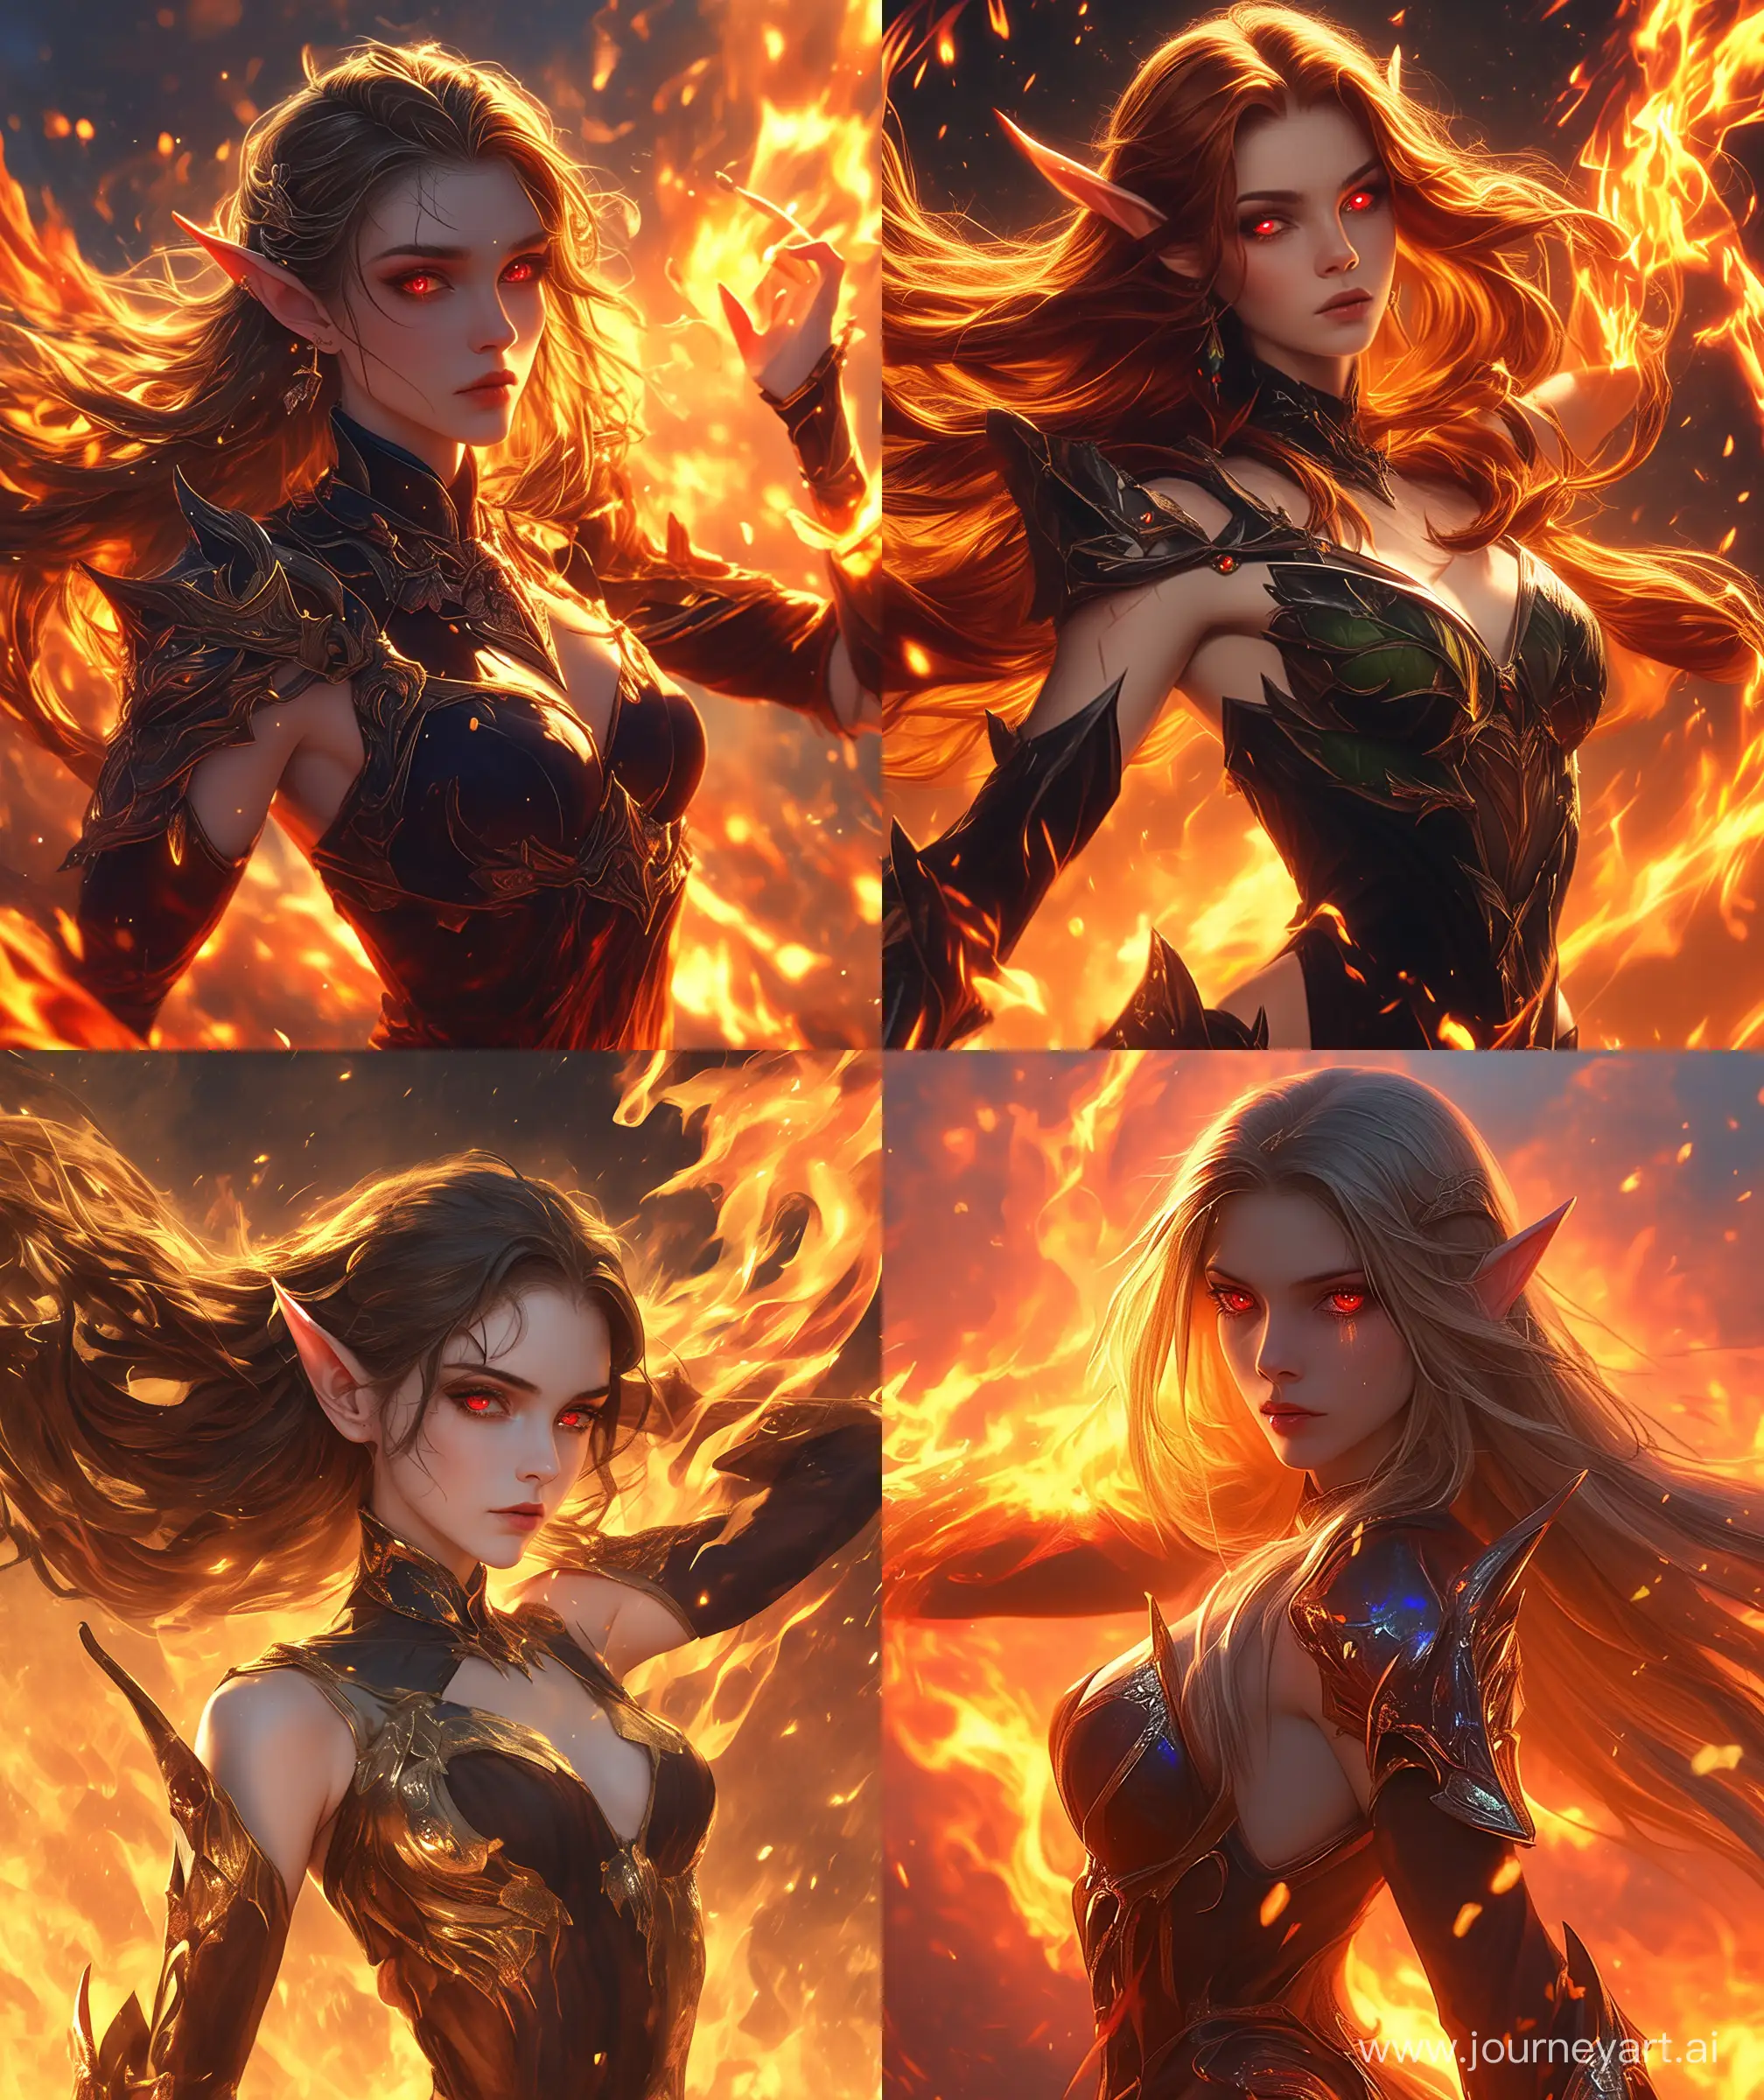 Beautiful elf woman, controlling fire, looking at viewers, beautiful red lens eyes, dynamic pose, upper body, glistening atmosphere, fire arena pit background, confidence face, godess warrior like dress up, amber hair colour, ultra hd, High quality  --ar 27:32 --niji 6